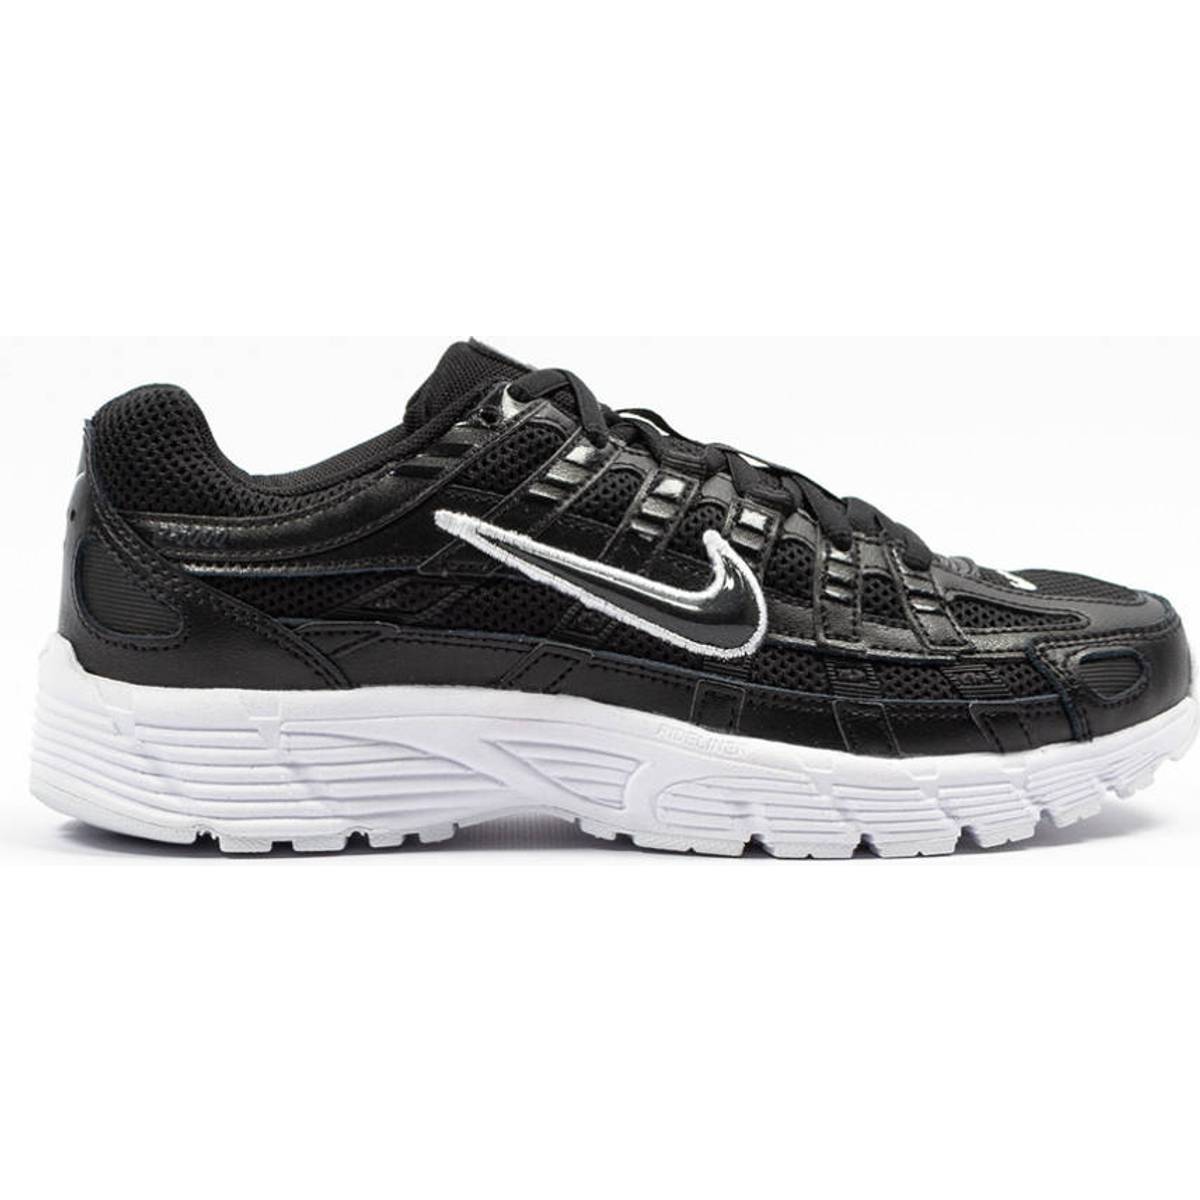 Nike p 6000 • Find the lowest price • Save money at PriceRunner